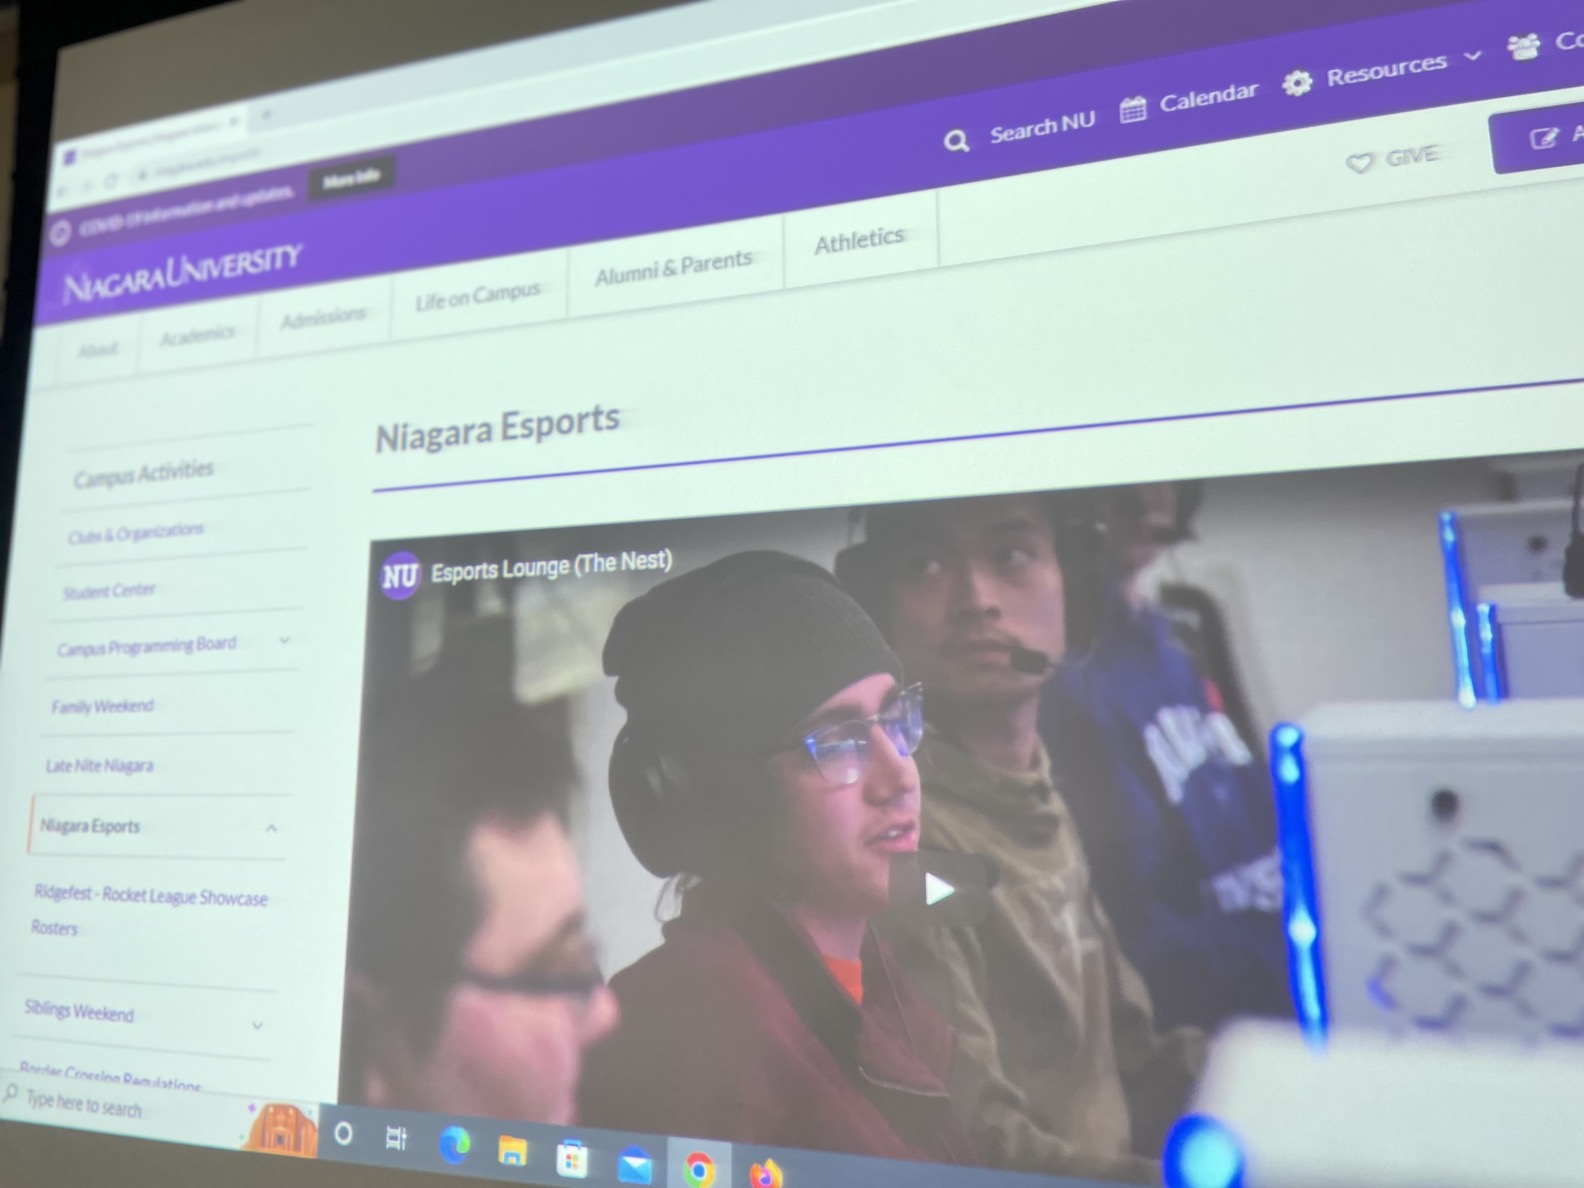 Esports is now among the top-attended clubs at Niagara University.